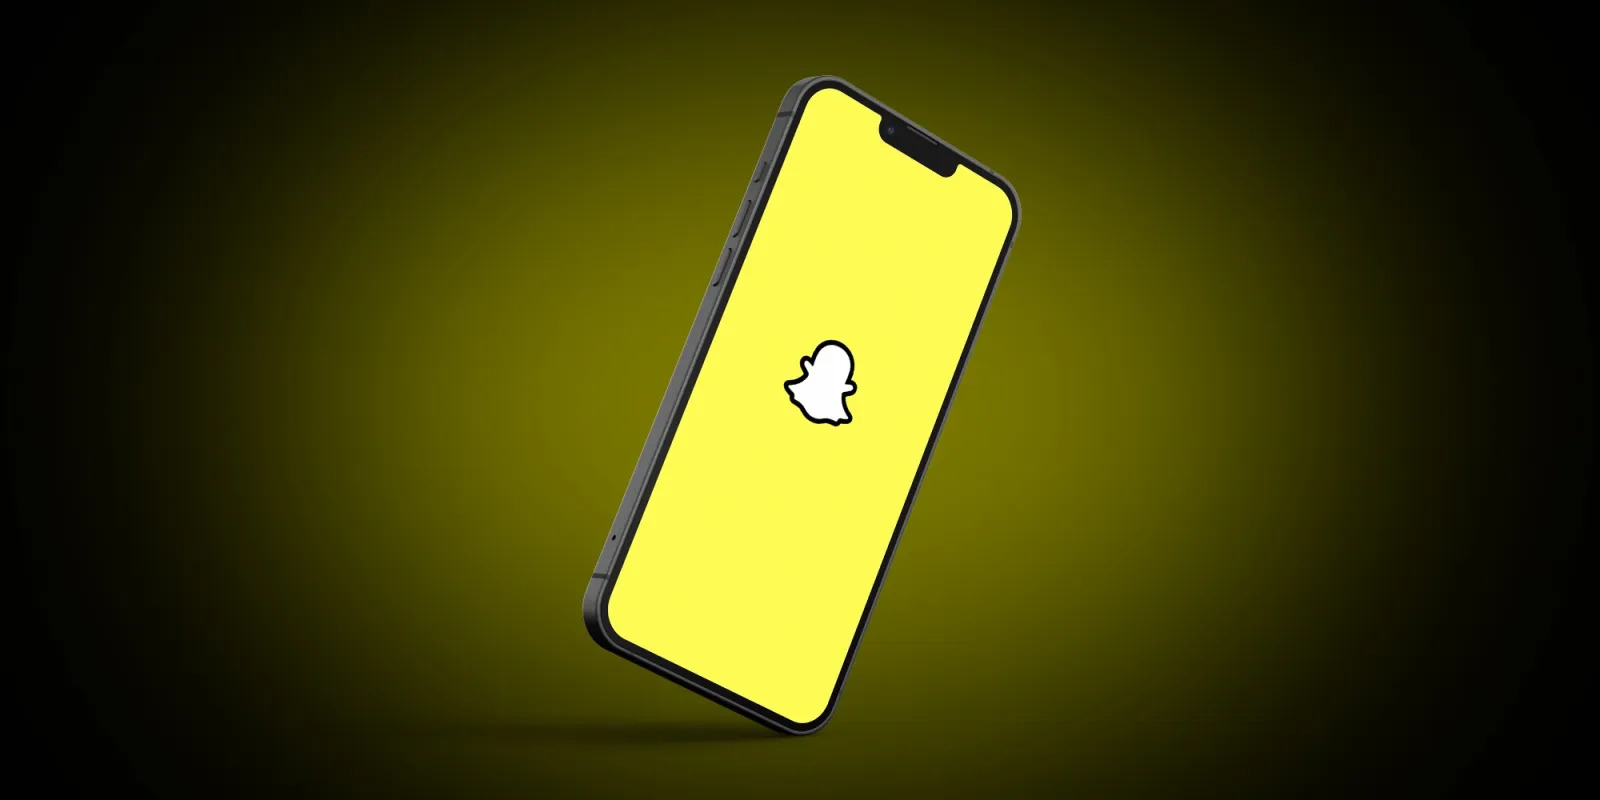 is-snapchat-free-heres-how-much-youll-need-to-pay-for-it